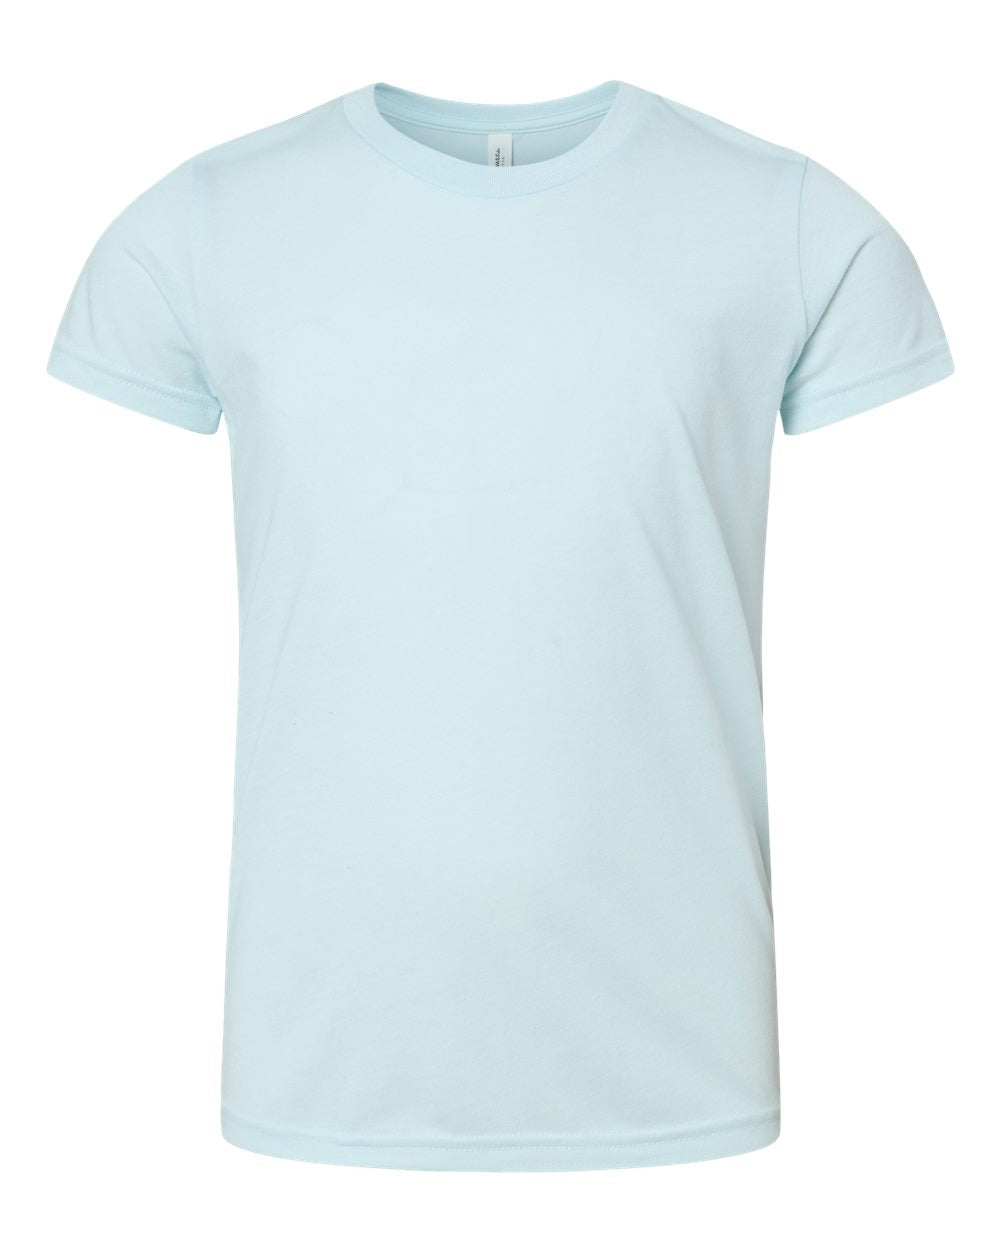 Bella + Canvas Youth Triblend Tee (3413y) in Ice Blue Triblend